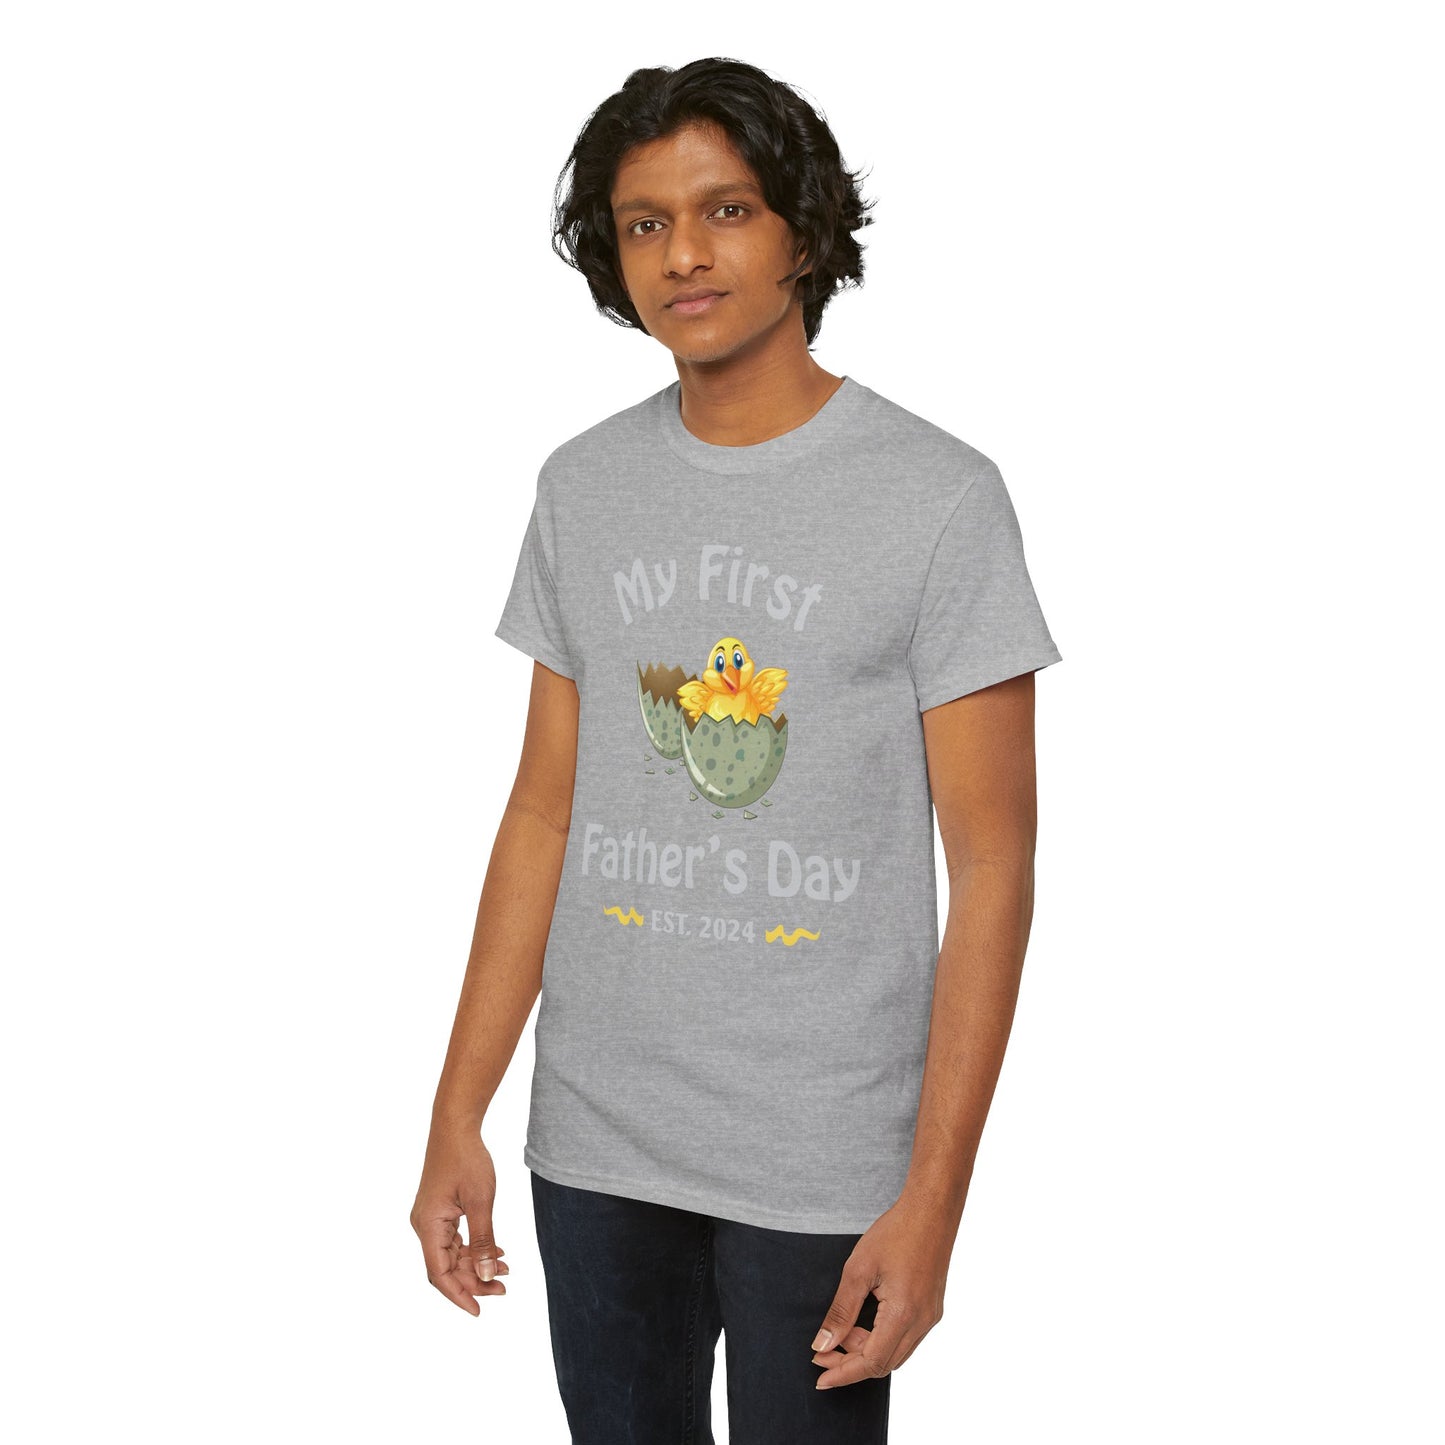 My First Father's Day - Hatching Chick - Est 2024 - Unisex Heavy Cotton Tee